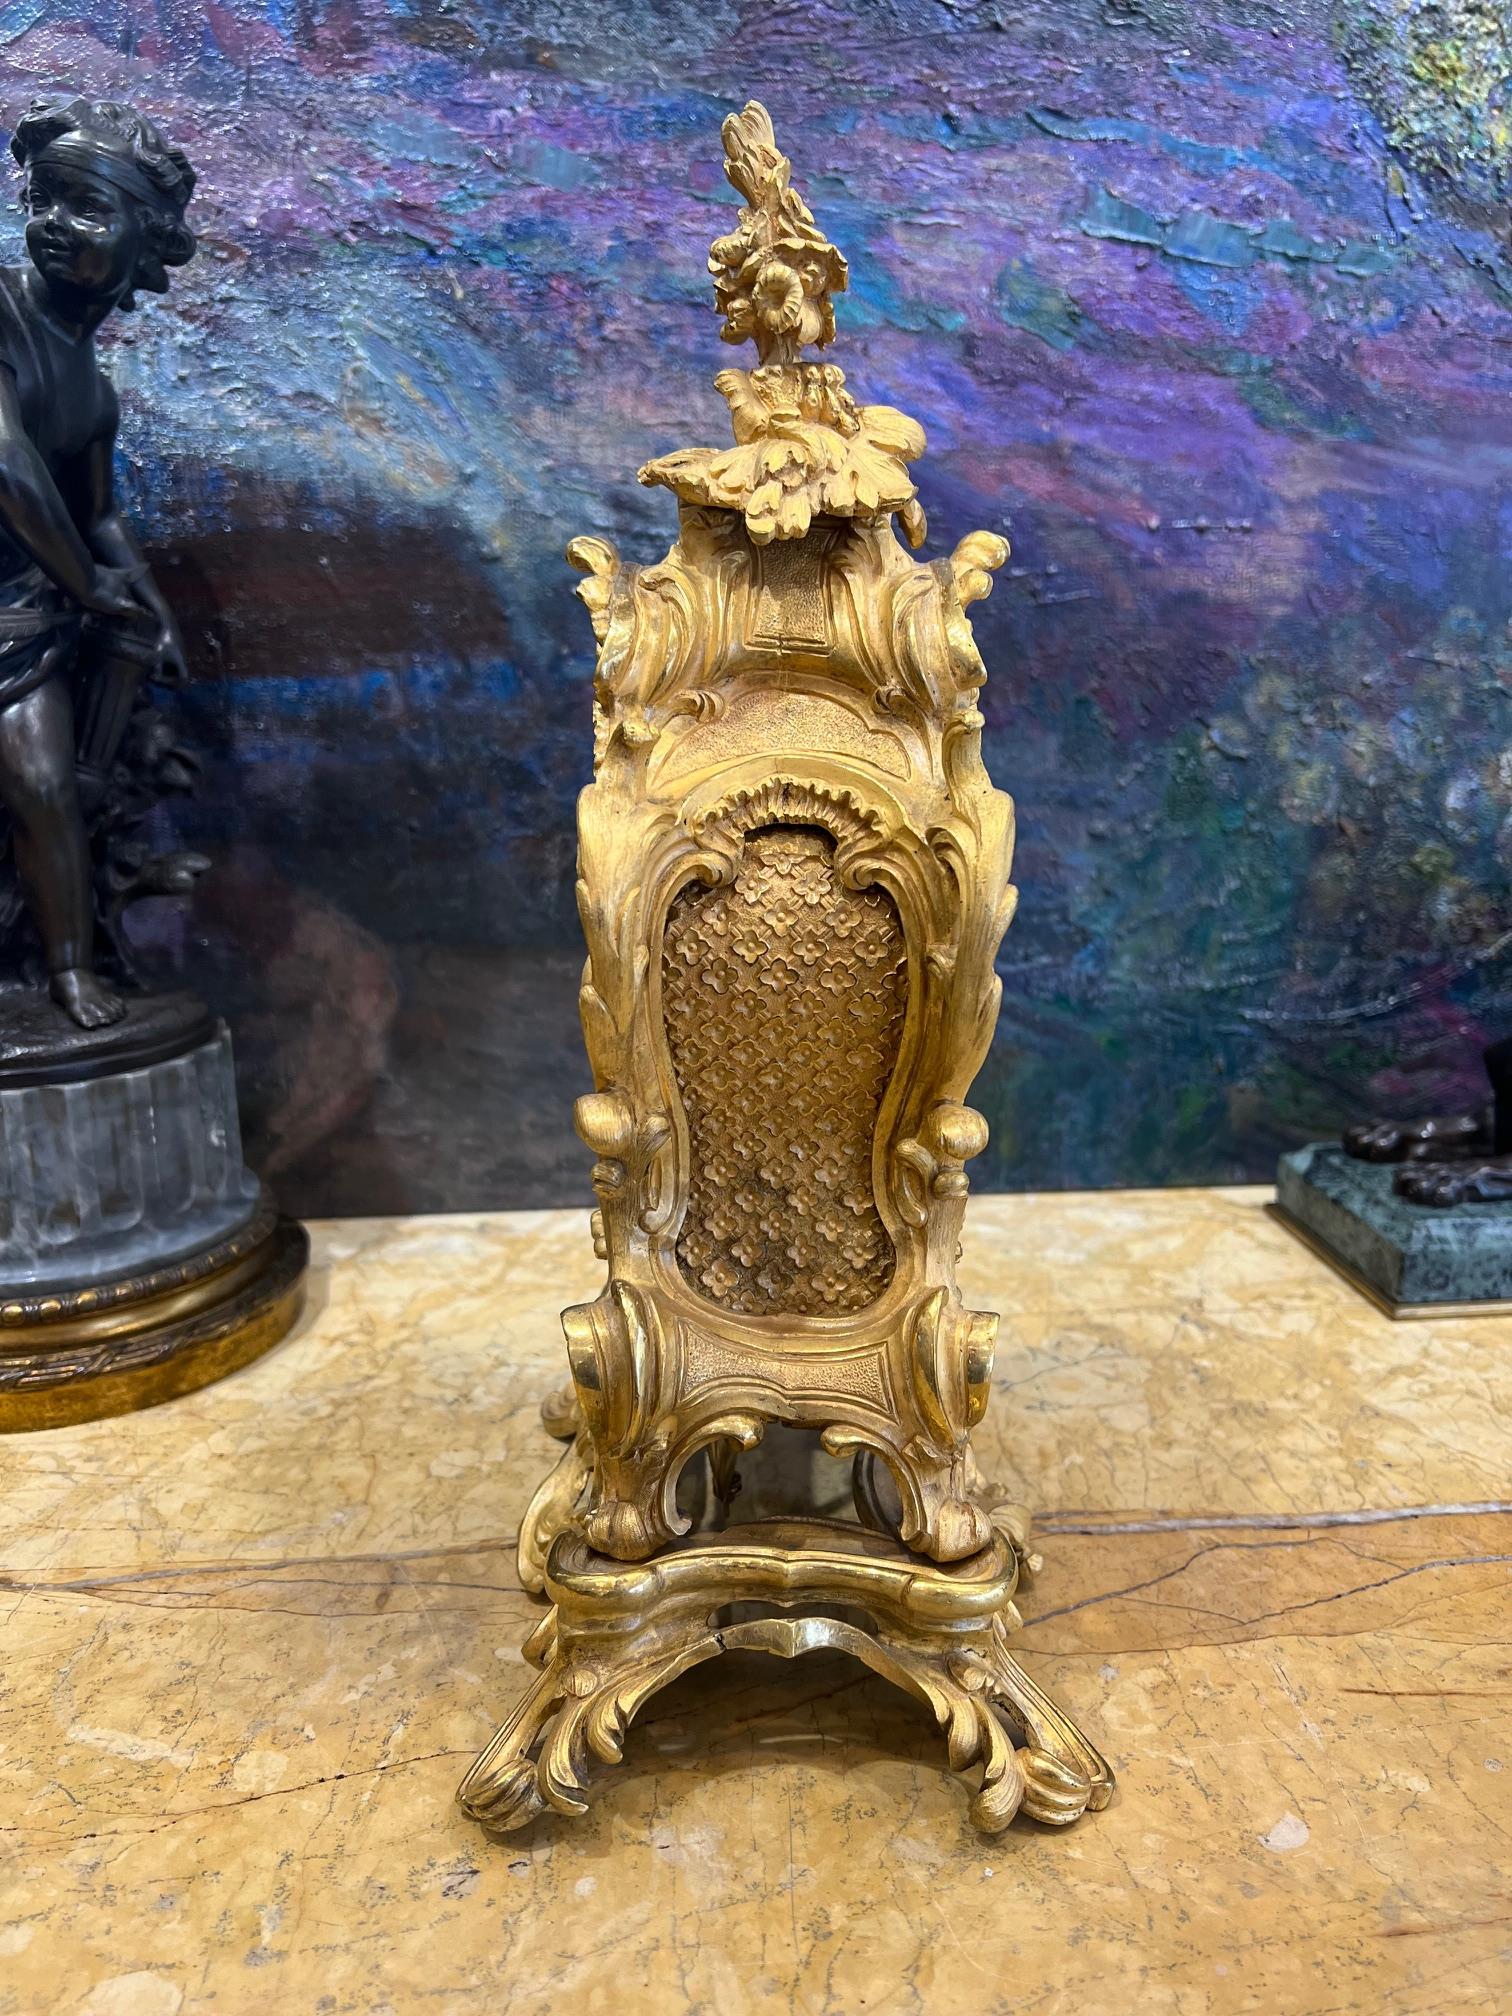 AN EARLY 19TH CENTURY ENGLISH GILT BRONZE FUSEE MANTEL CLOCK - Image 3 of 8